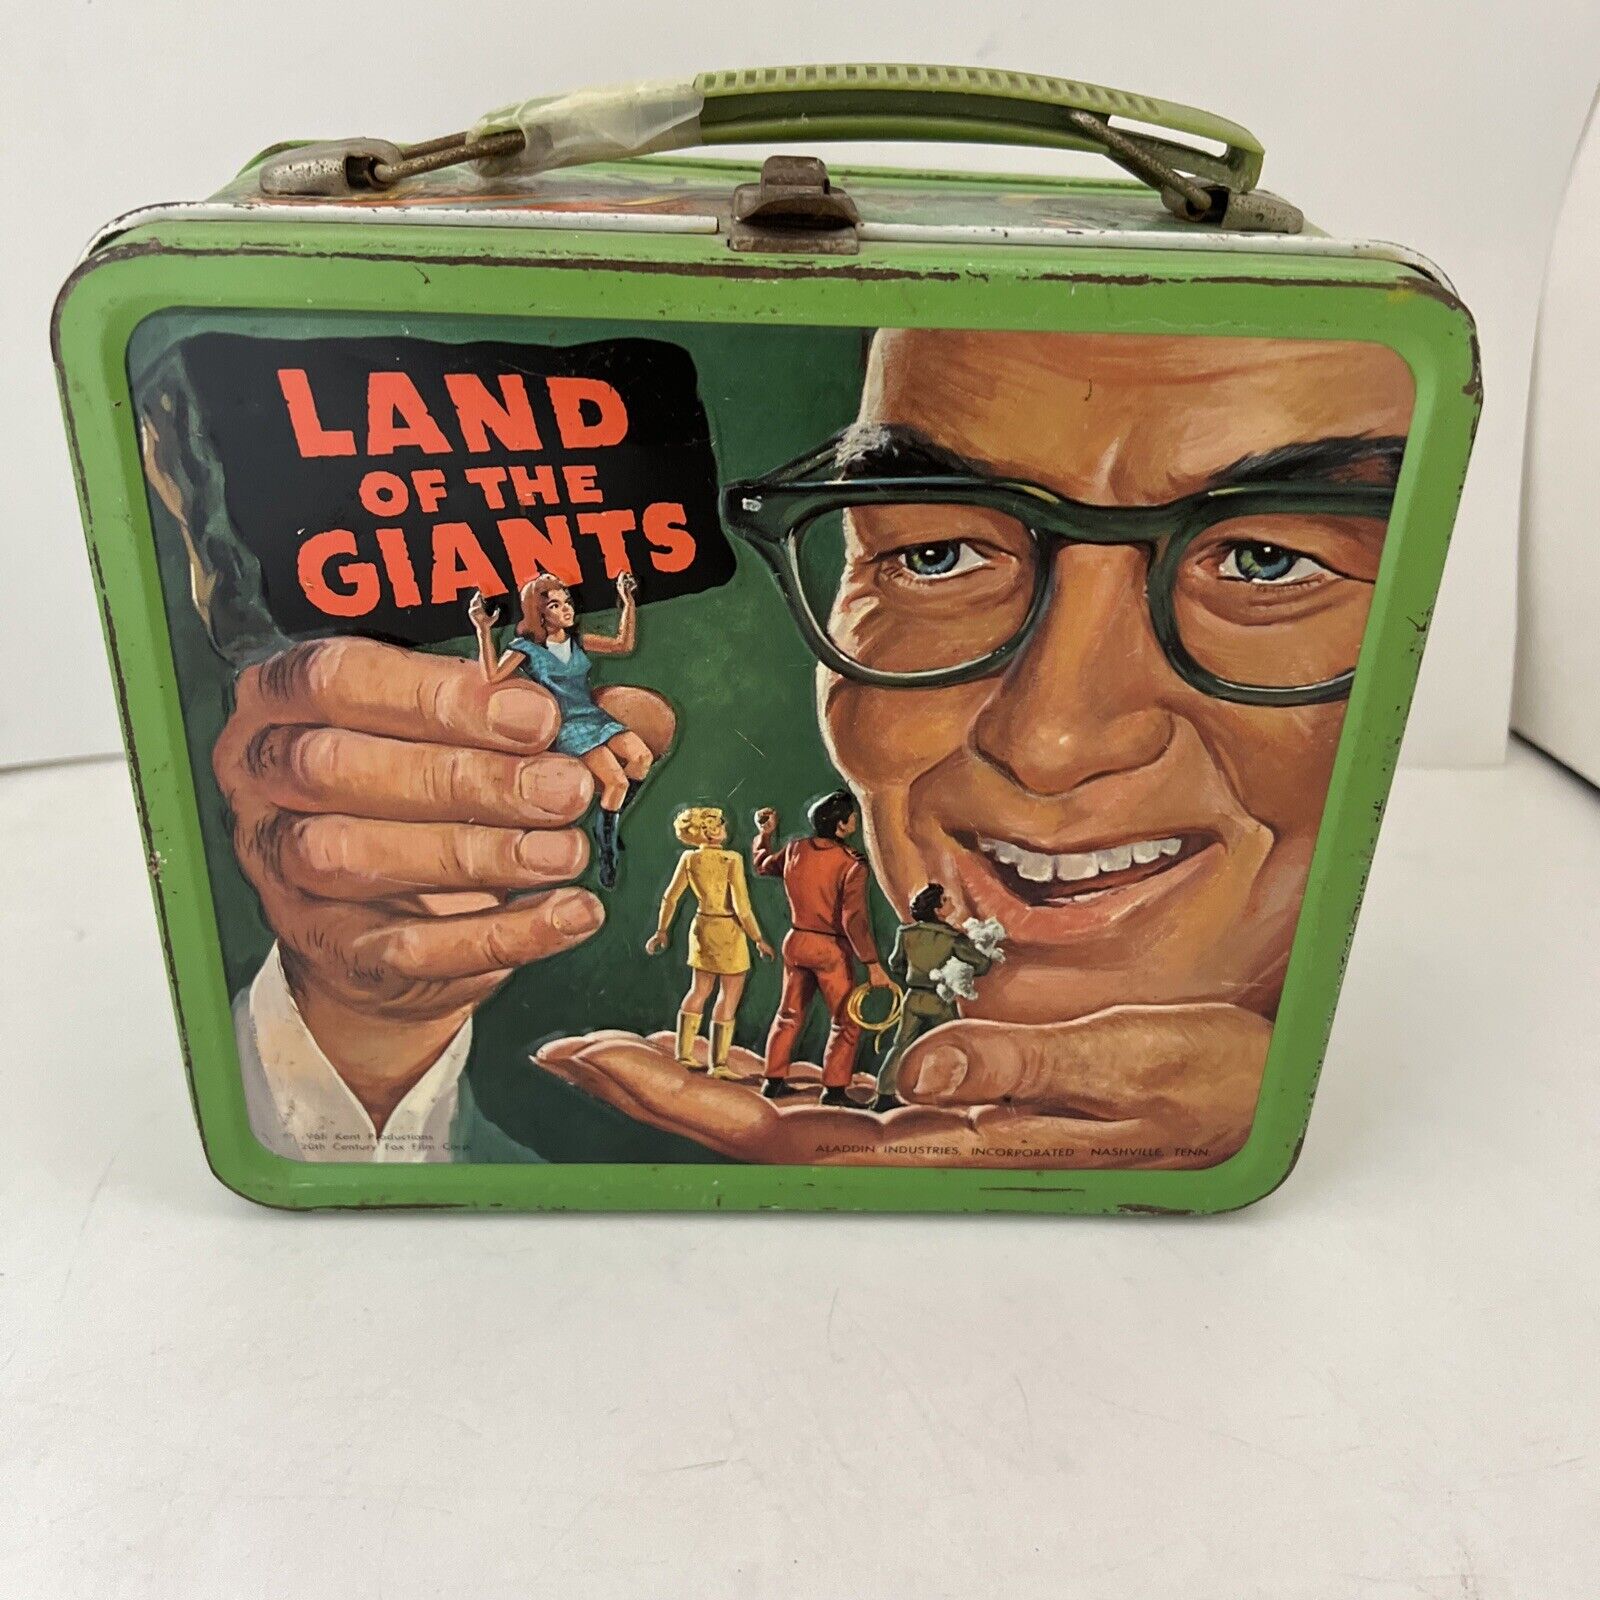 Vintage Land of the Giants Metal Embossed Lunchbox by Aladdin, No Thermos. ~1968